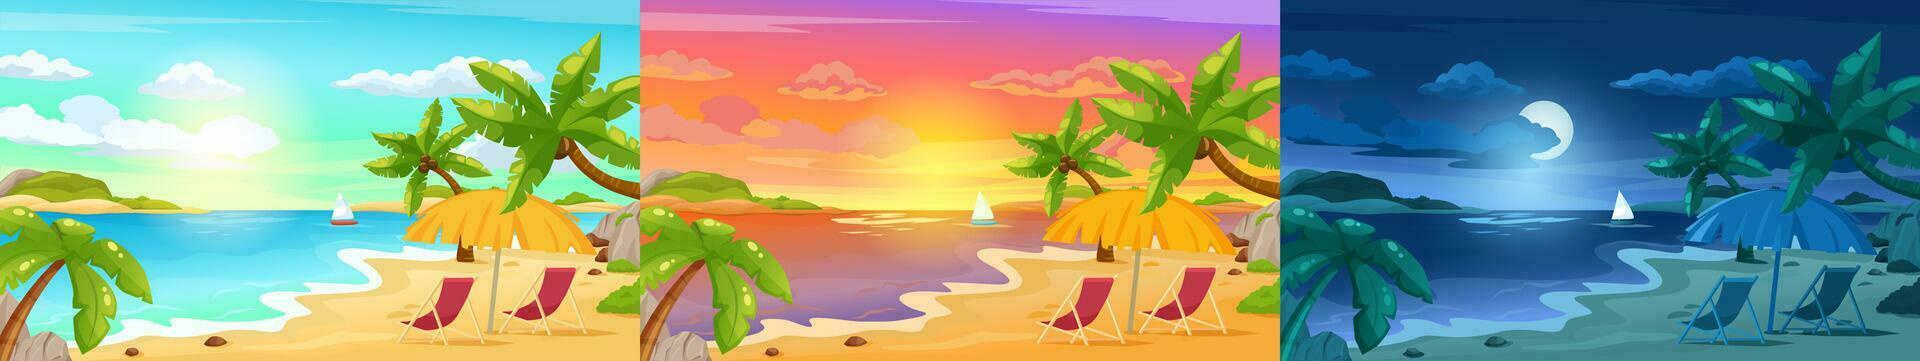 Beach landscape at night, tropical island sunset scene. Summer holiday vacation, sunny summertime seascape with palms vector illustration